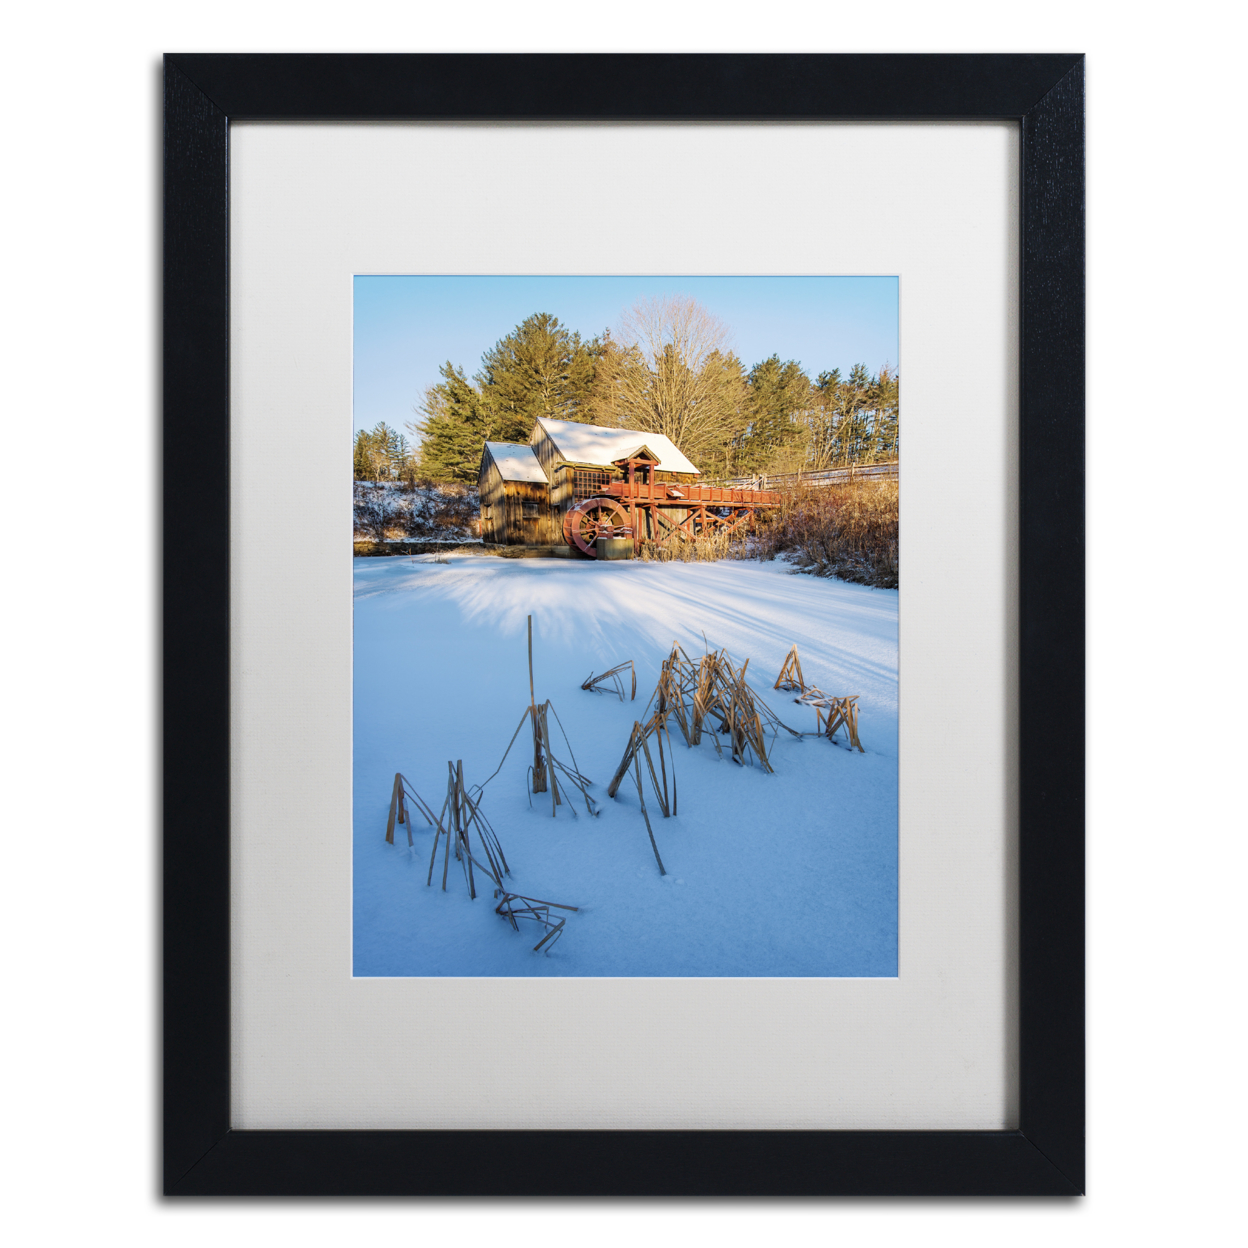 Michael Blanchette Photography 'Pond Grasses' Black Wooden Framed Art 18 X 22 Inches